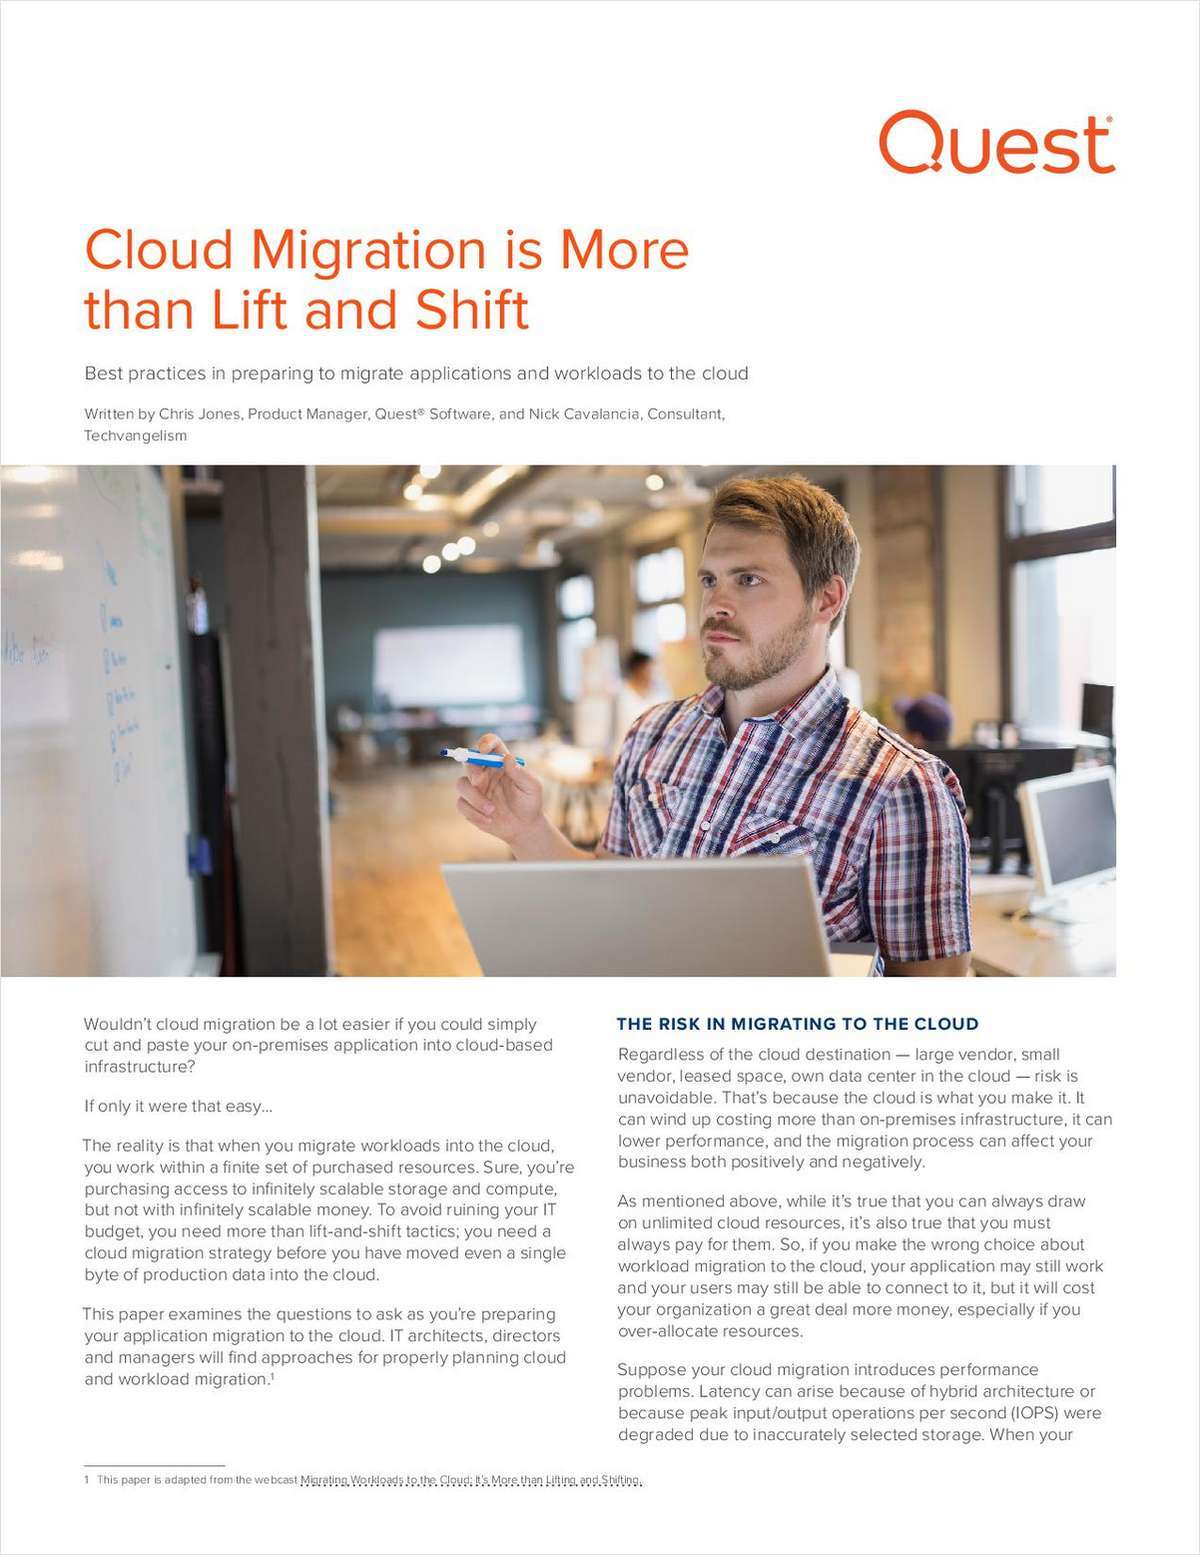 Cloud Migration is More than Lift and Shift